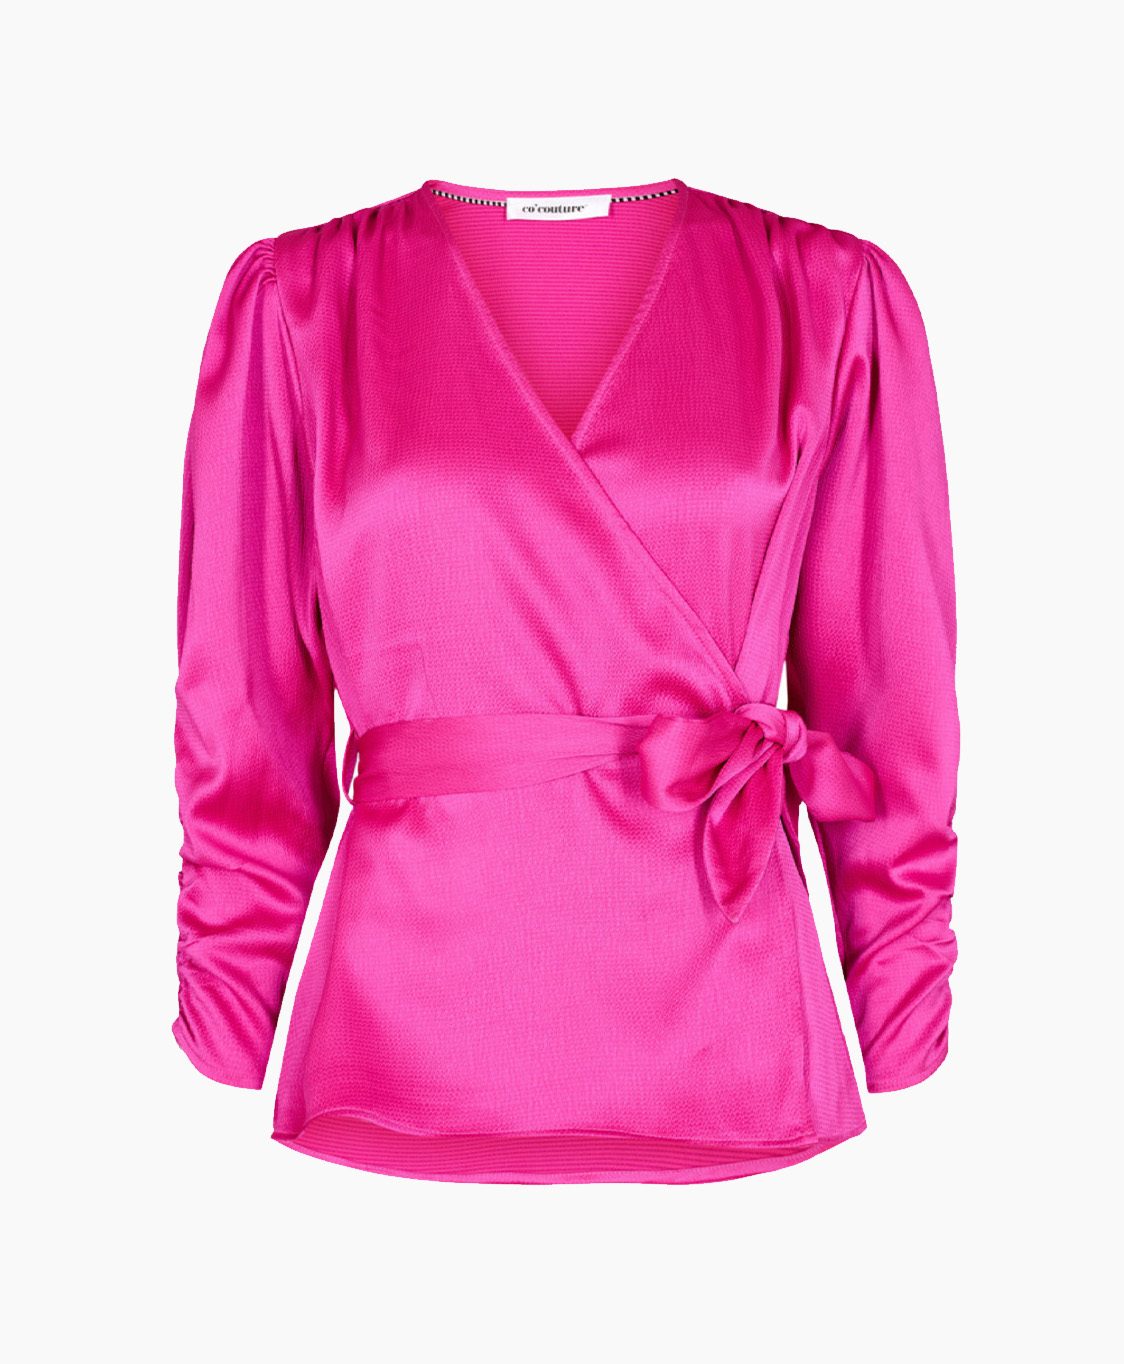 Co'couture Blouse Mira Wrap Pink